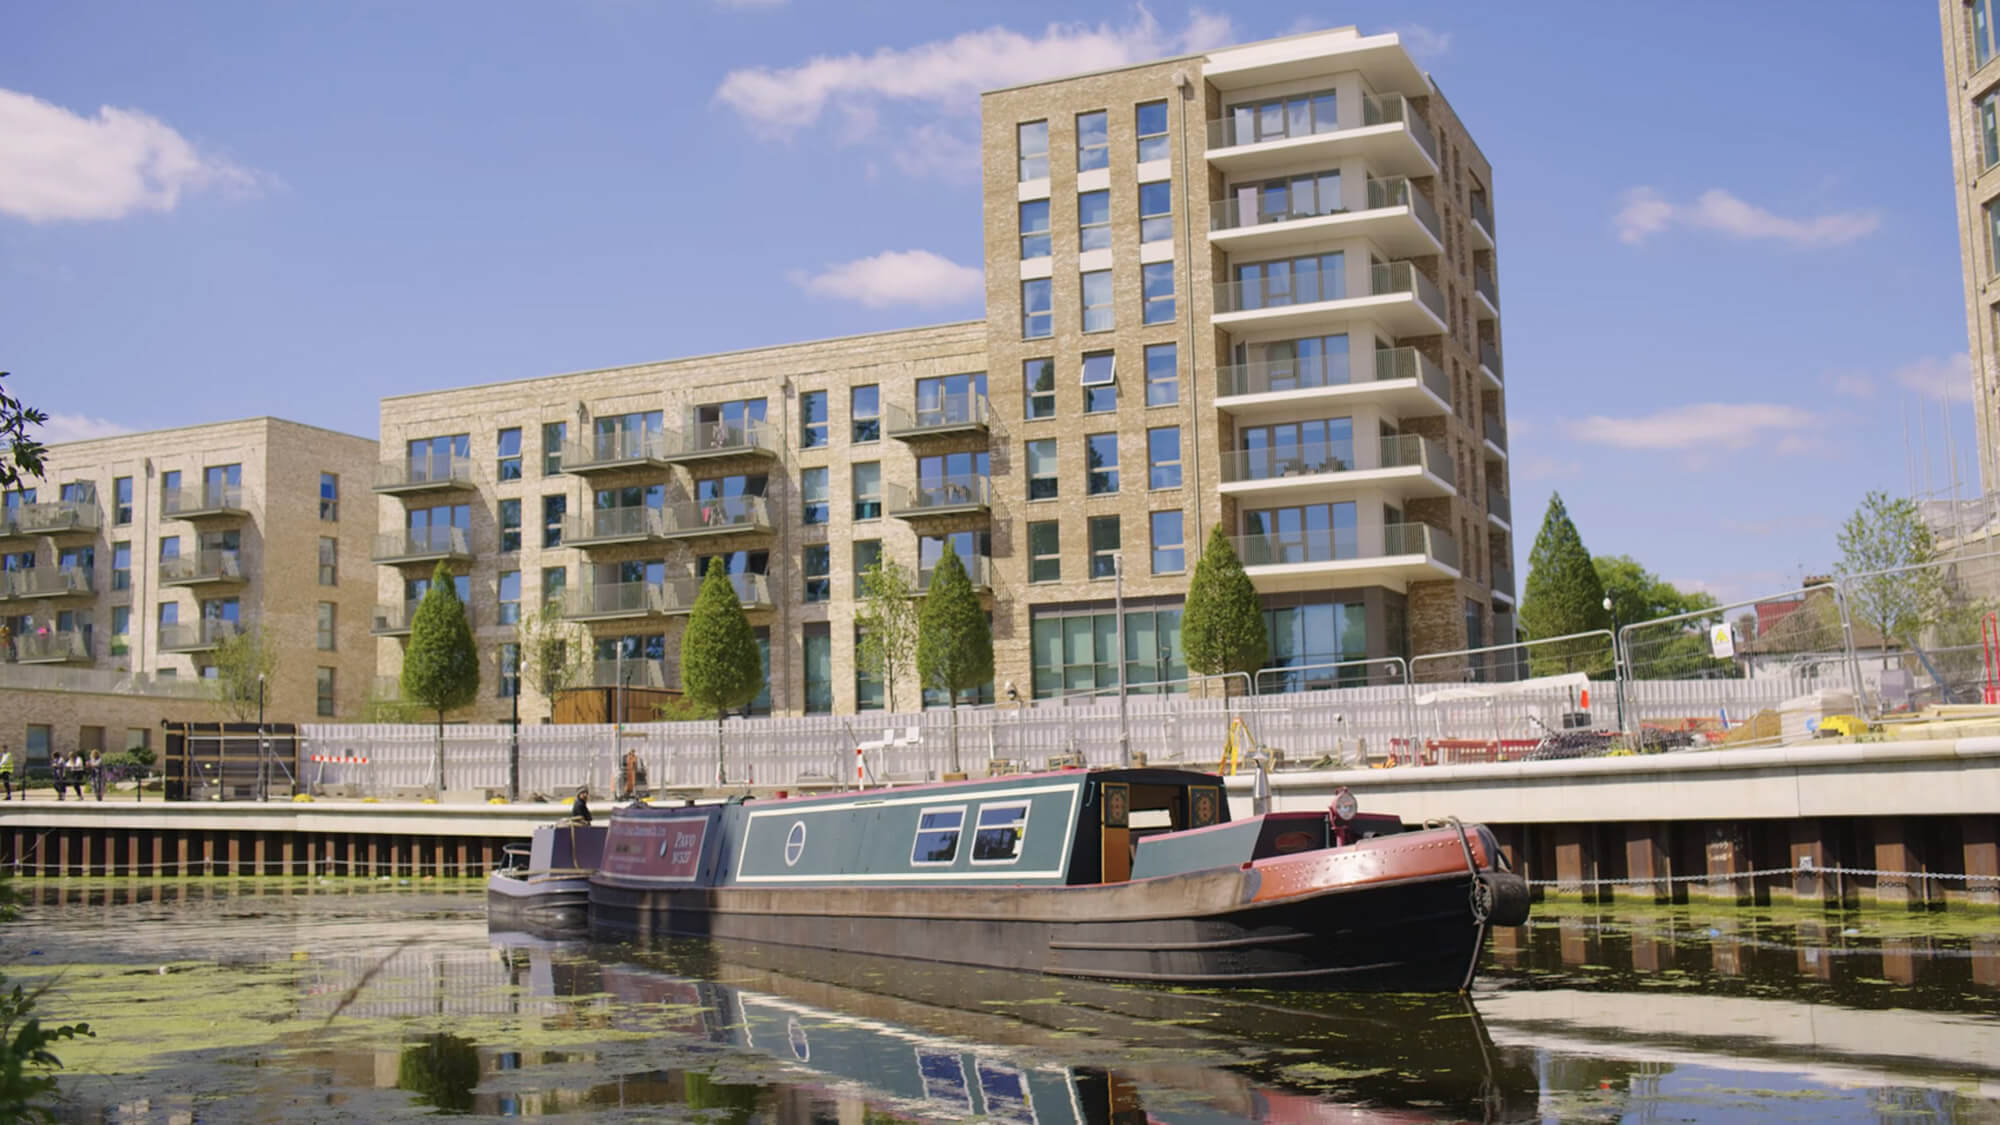 Still image from a real estate video of Berkeley Homes new canal-side property development, next to PAVO, an historic narrowboat